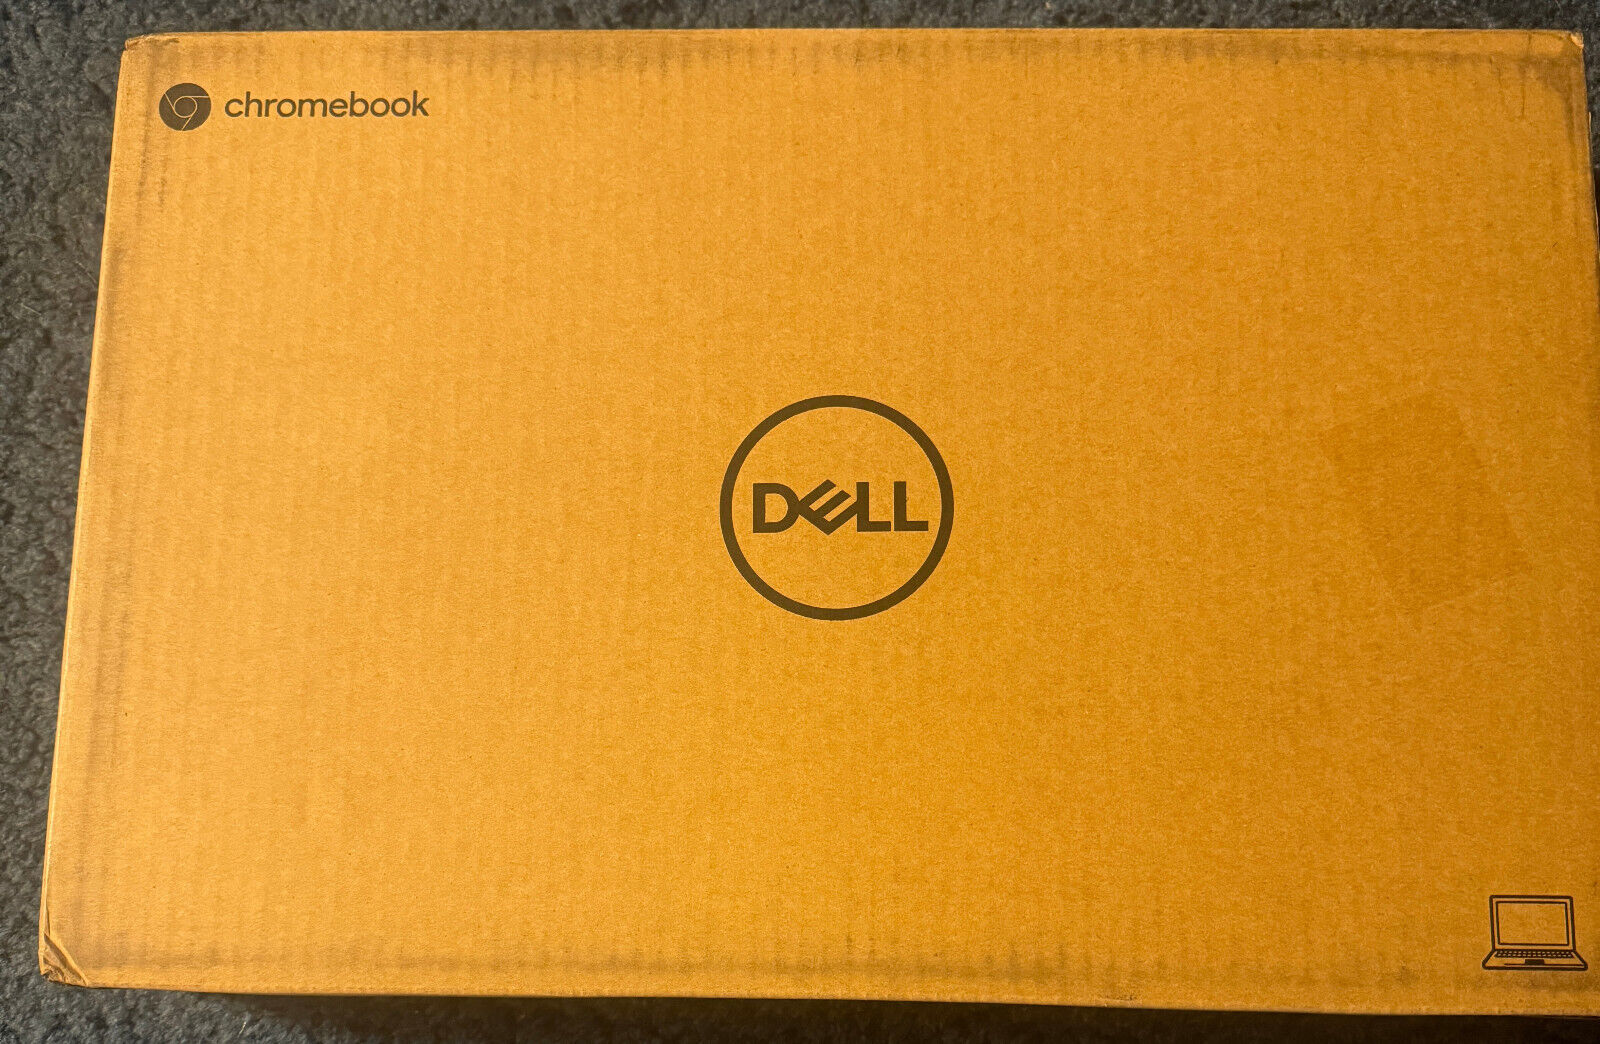 NEW IN BOX NEVER OPENED DELL CHROMEBOOK *Free Shipping*